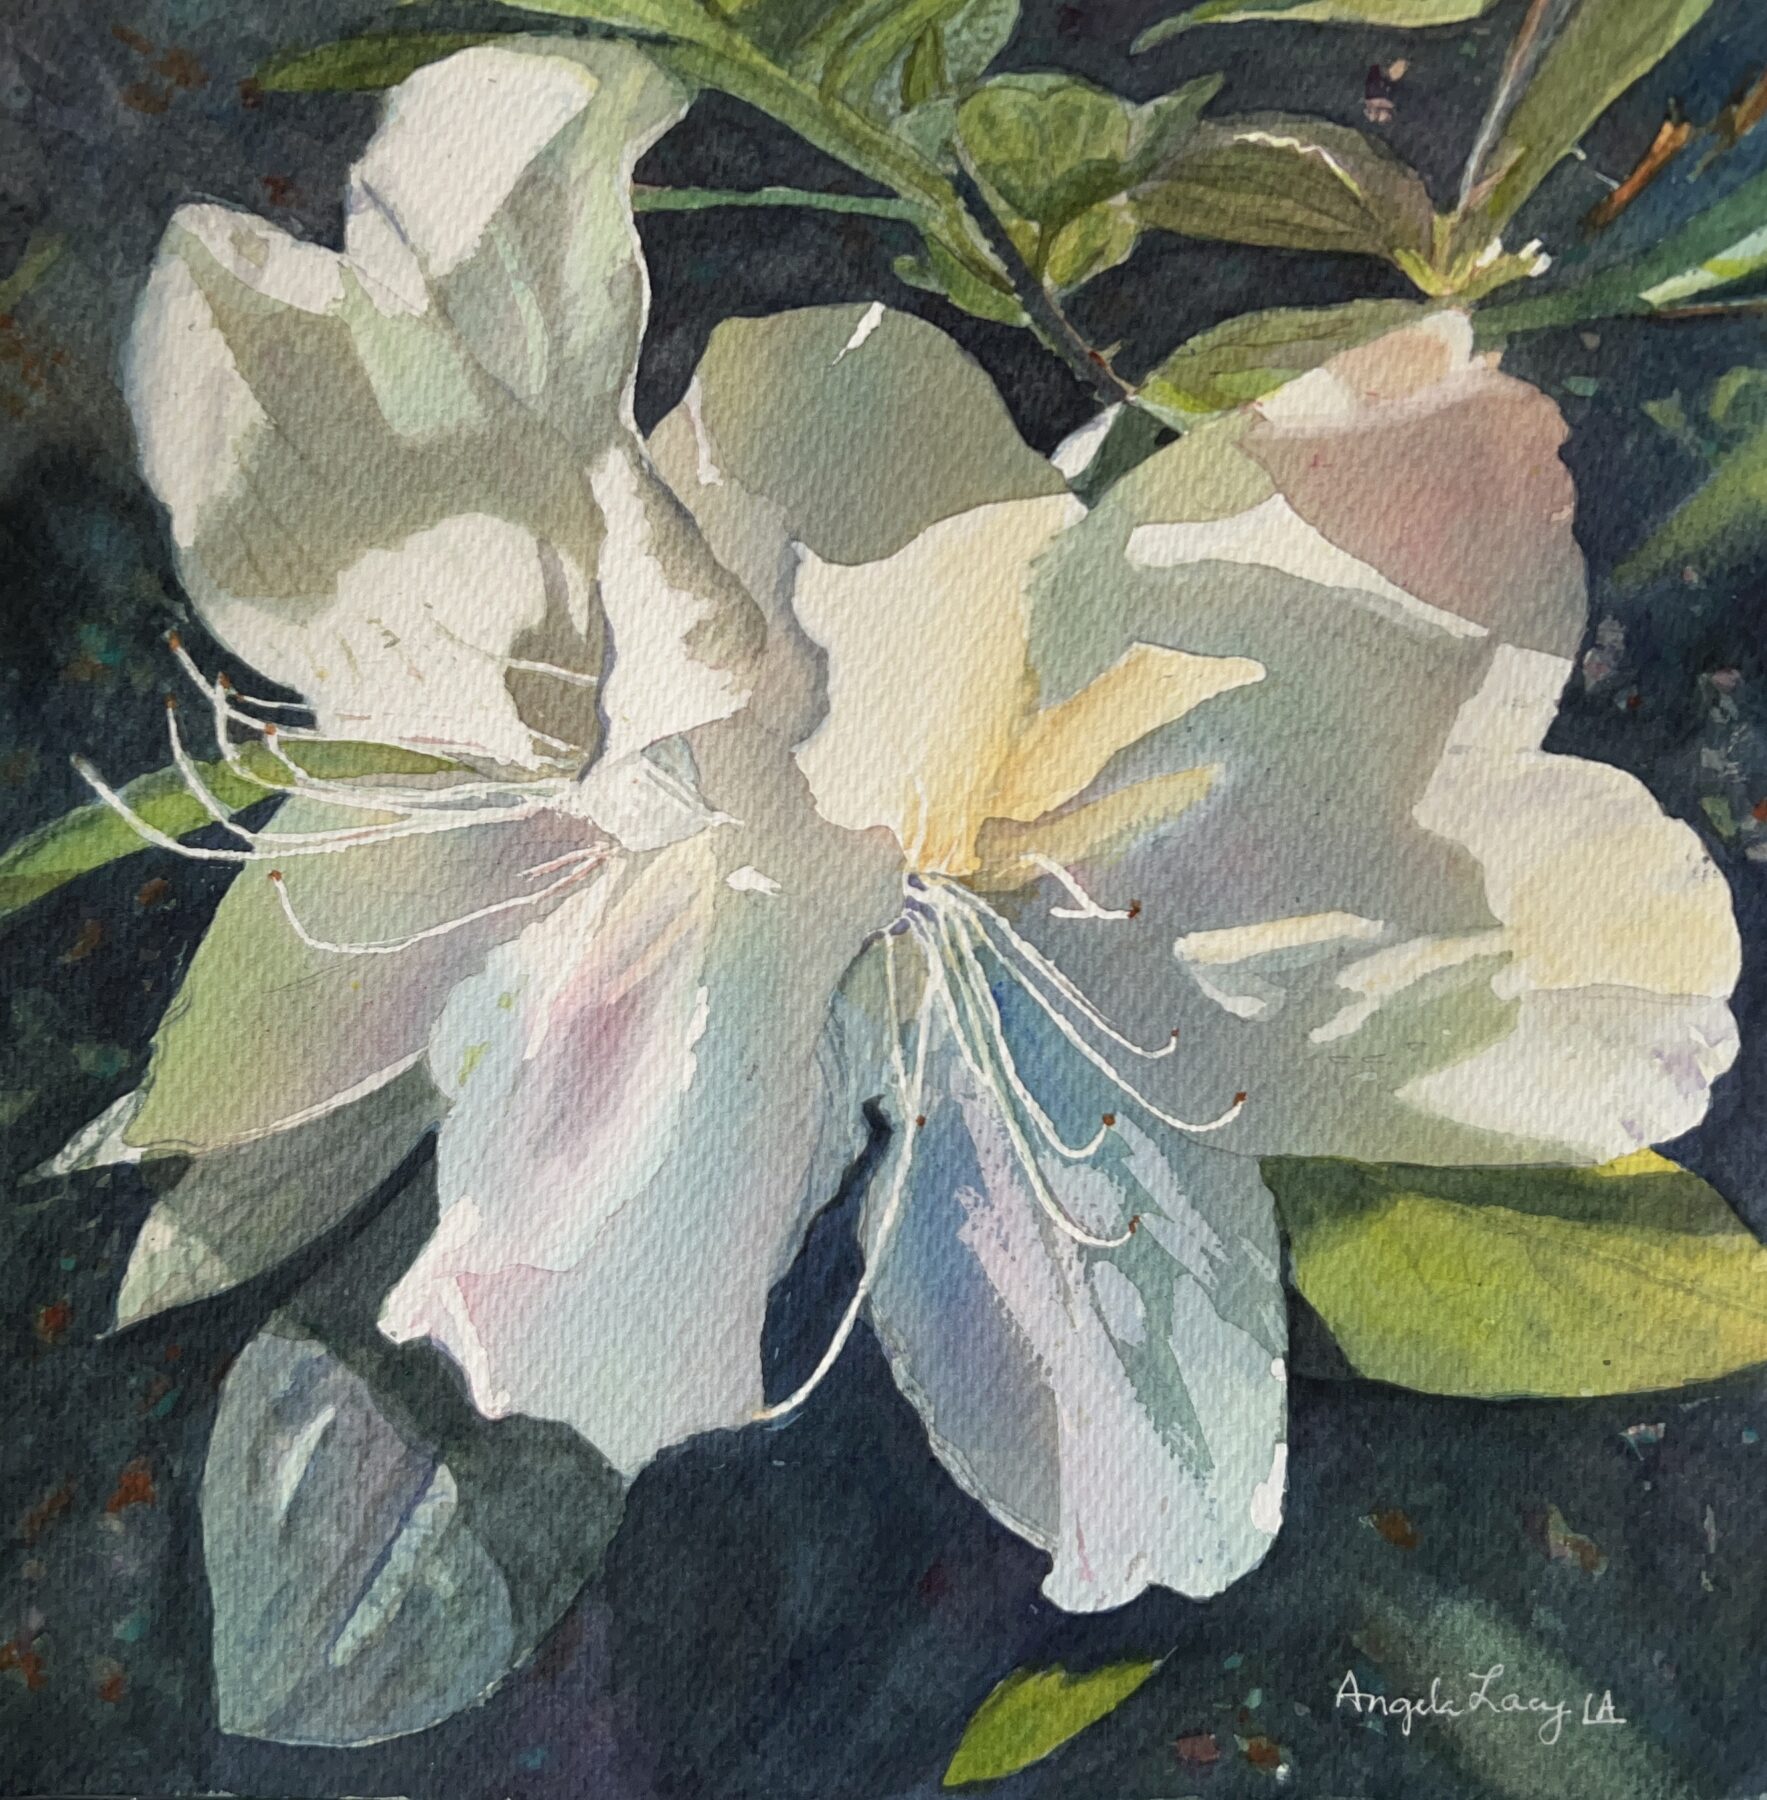 A watercolor titled "together" by Angela Lacey that features 2 large white azalea like flowers against dark green leaves